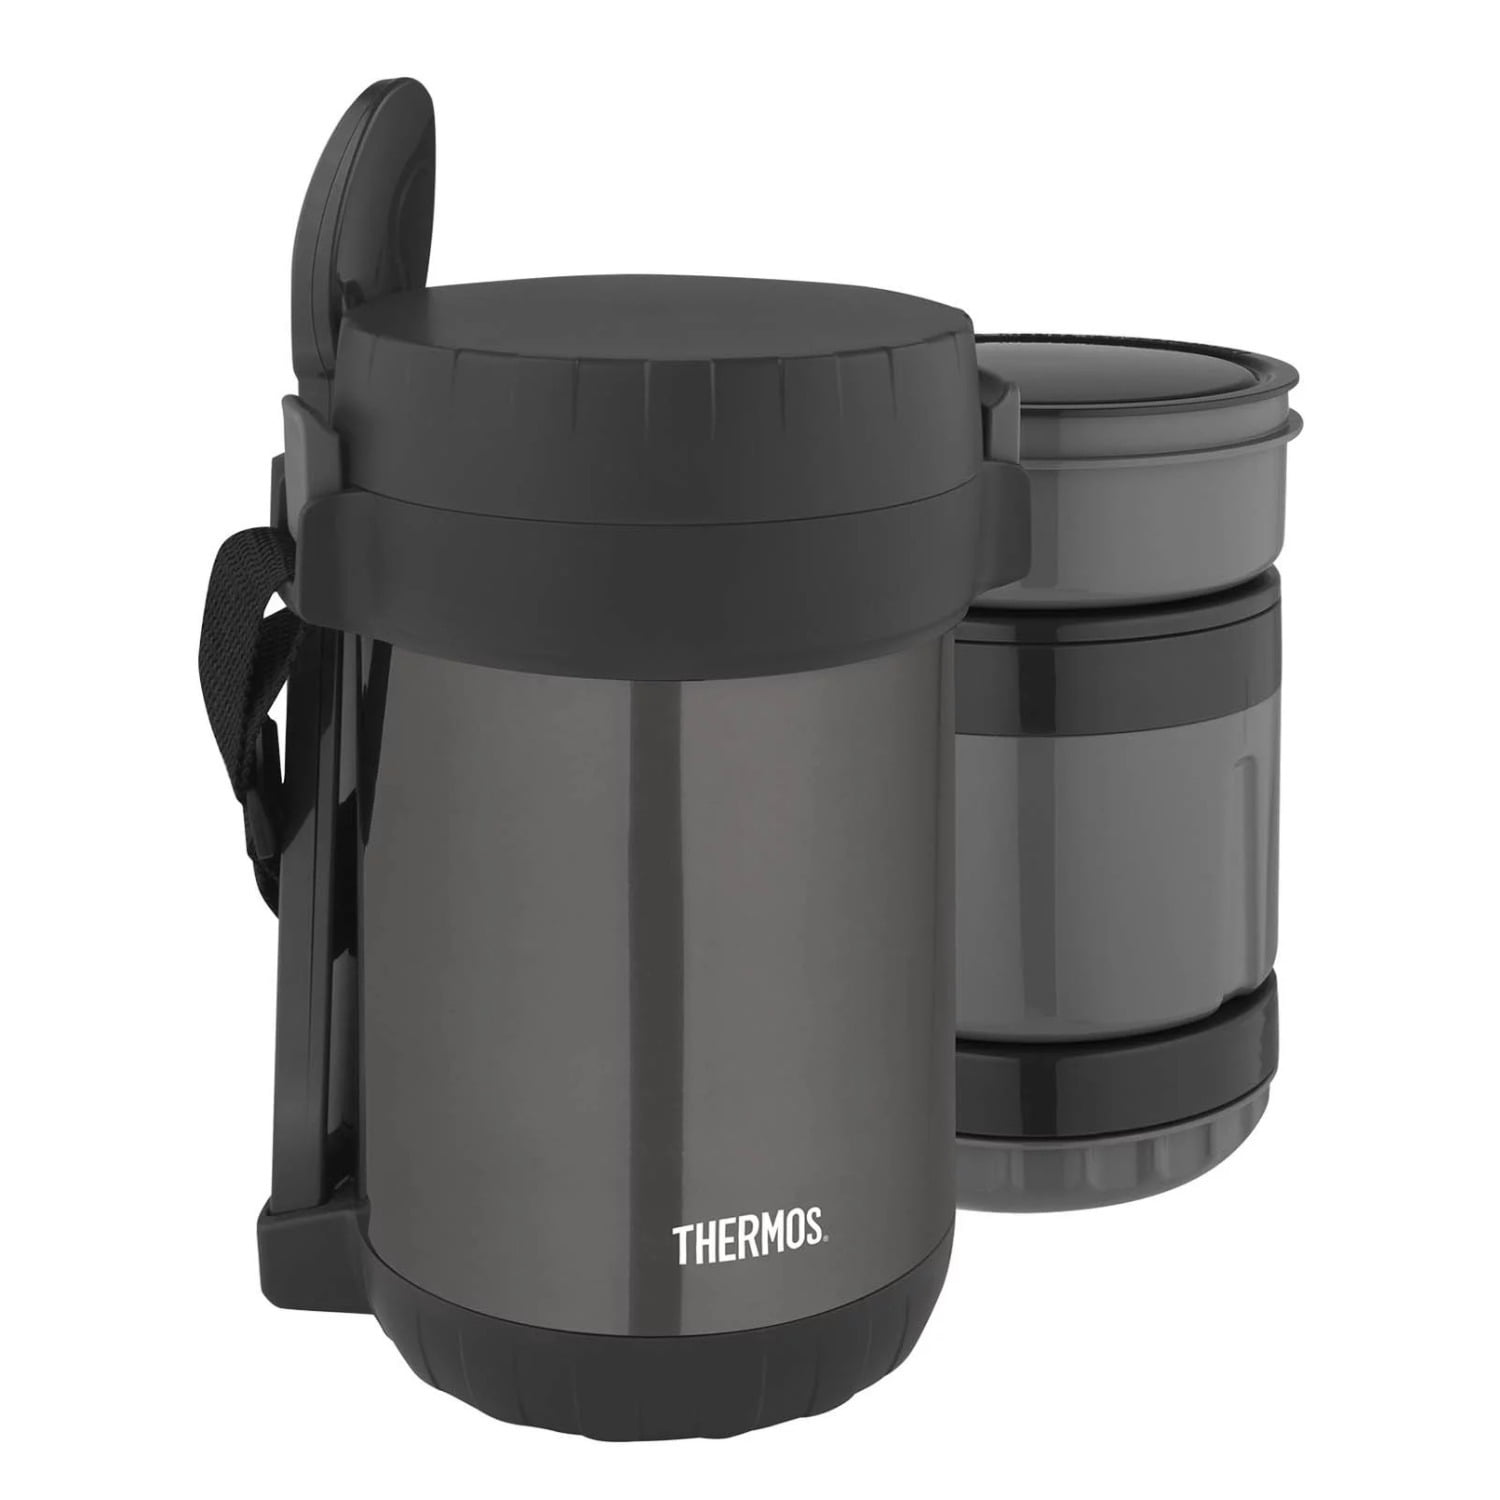 Thermos-Nissan 61-oz Insulated Bottle - Boing Boing